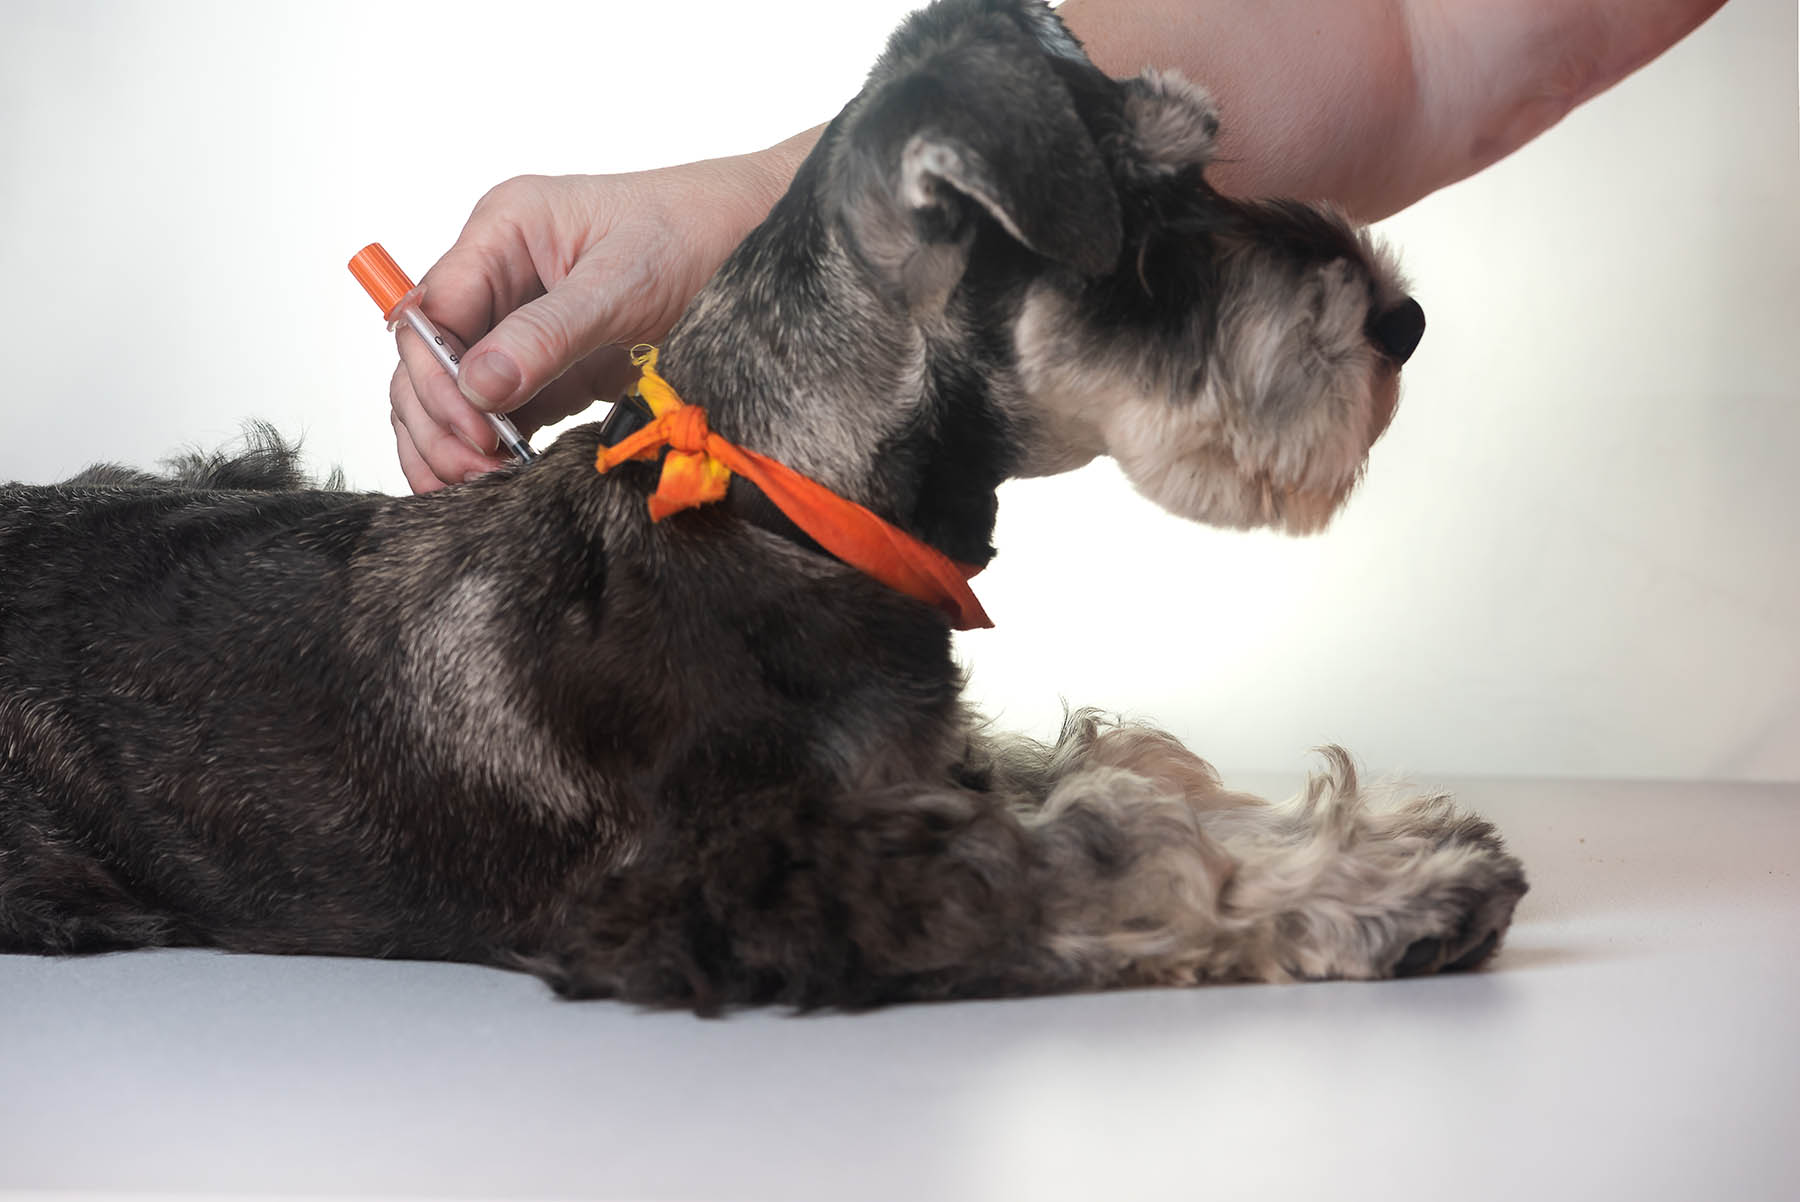 Treating Diabetic Dogs: Finding Safe and Tasty Options